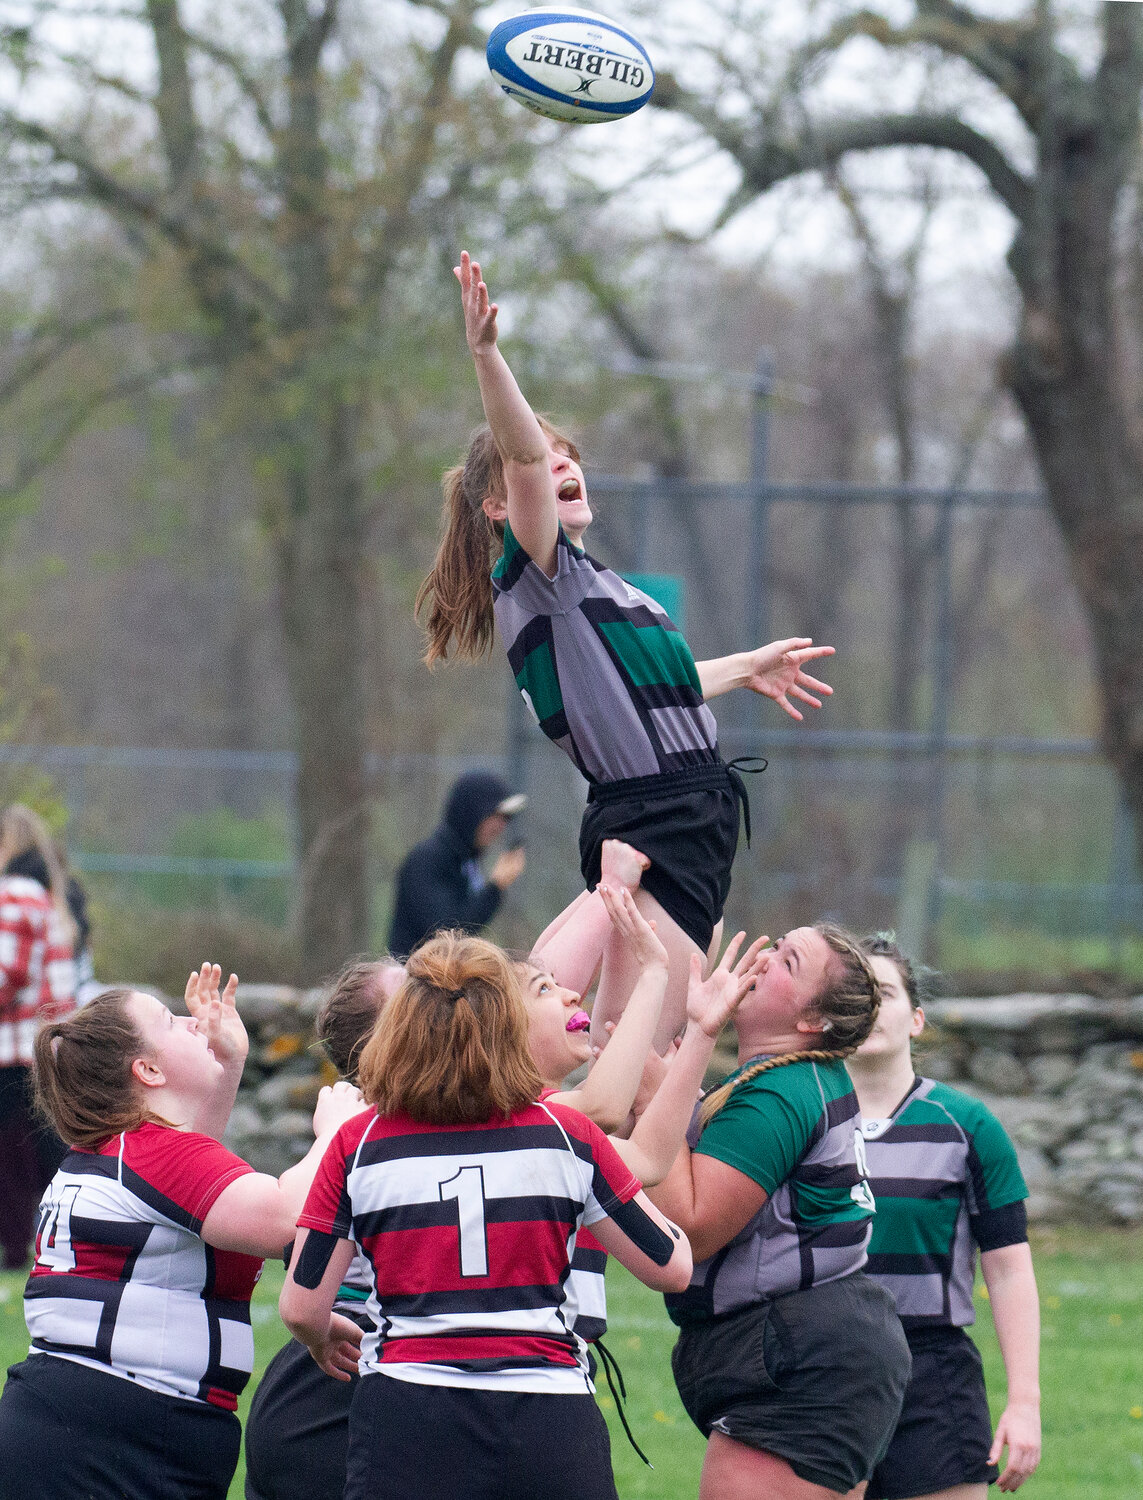 Charlie “Flynn” Gehan of UVM attempts to grab a throw-in during a lineout.